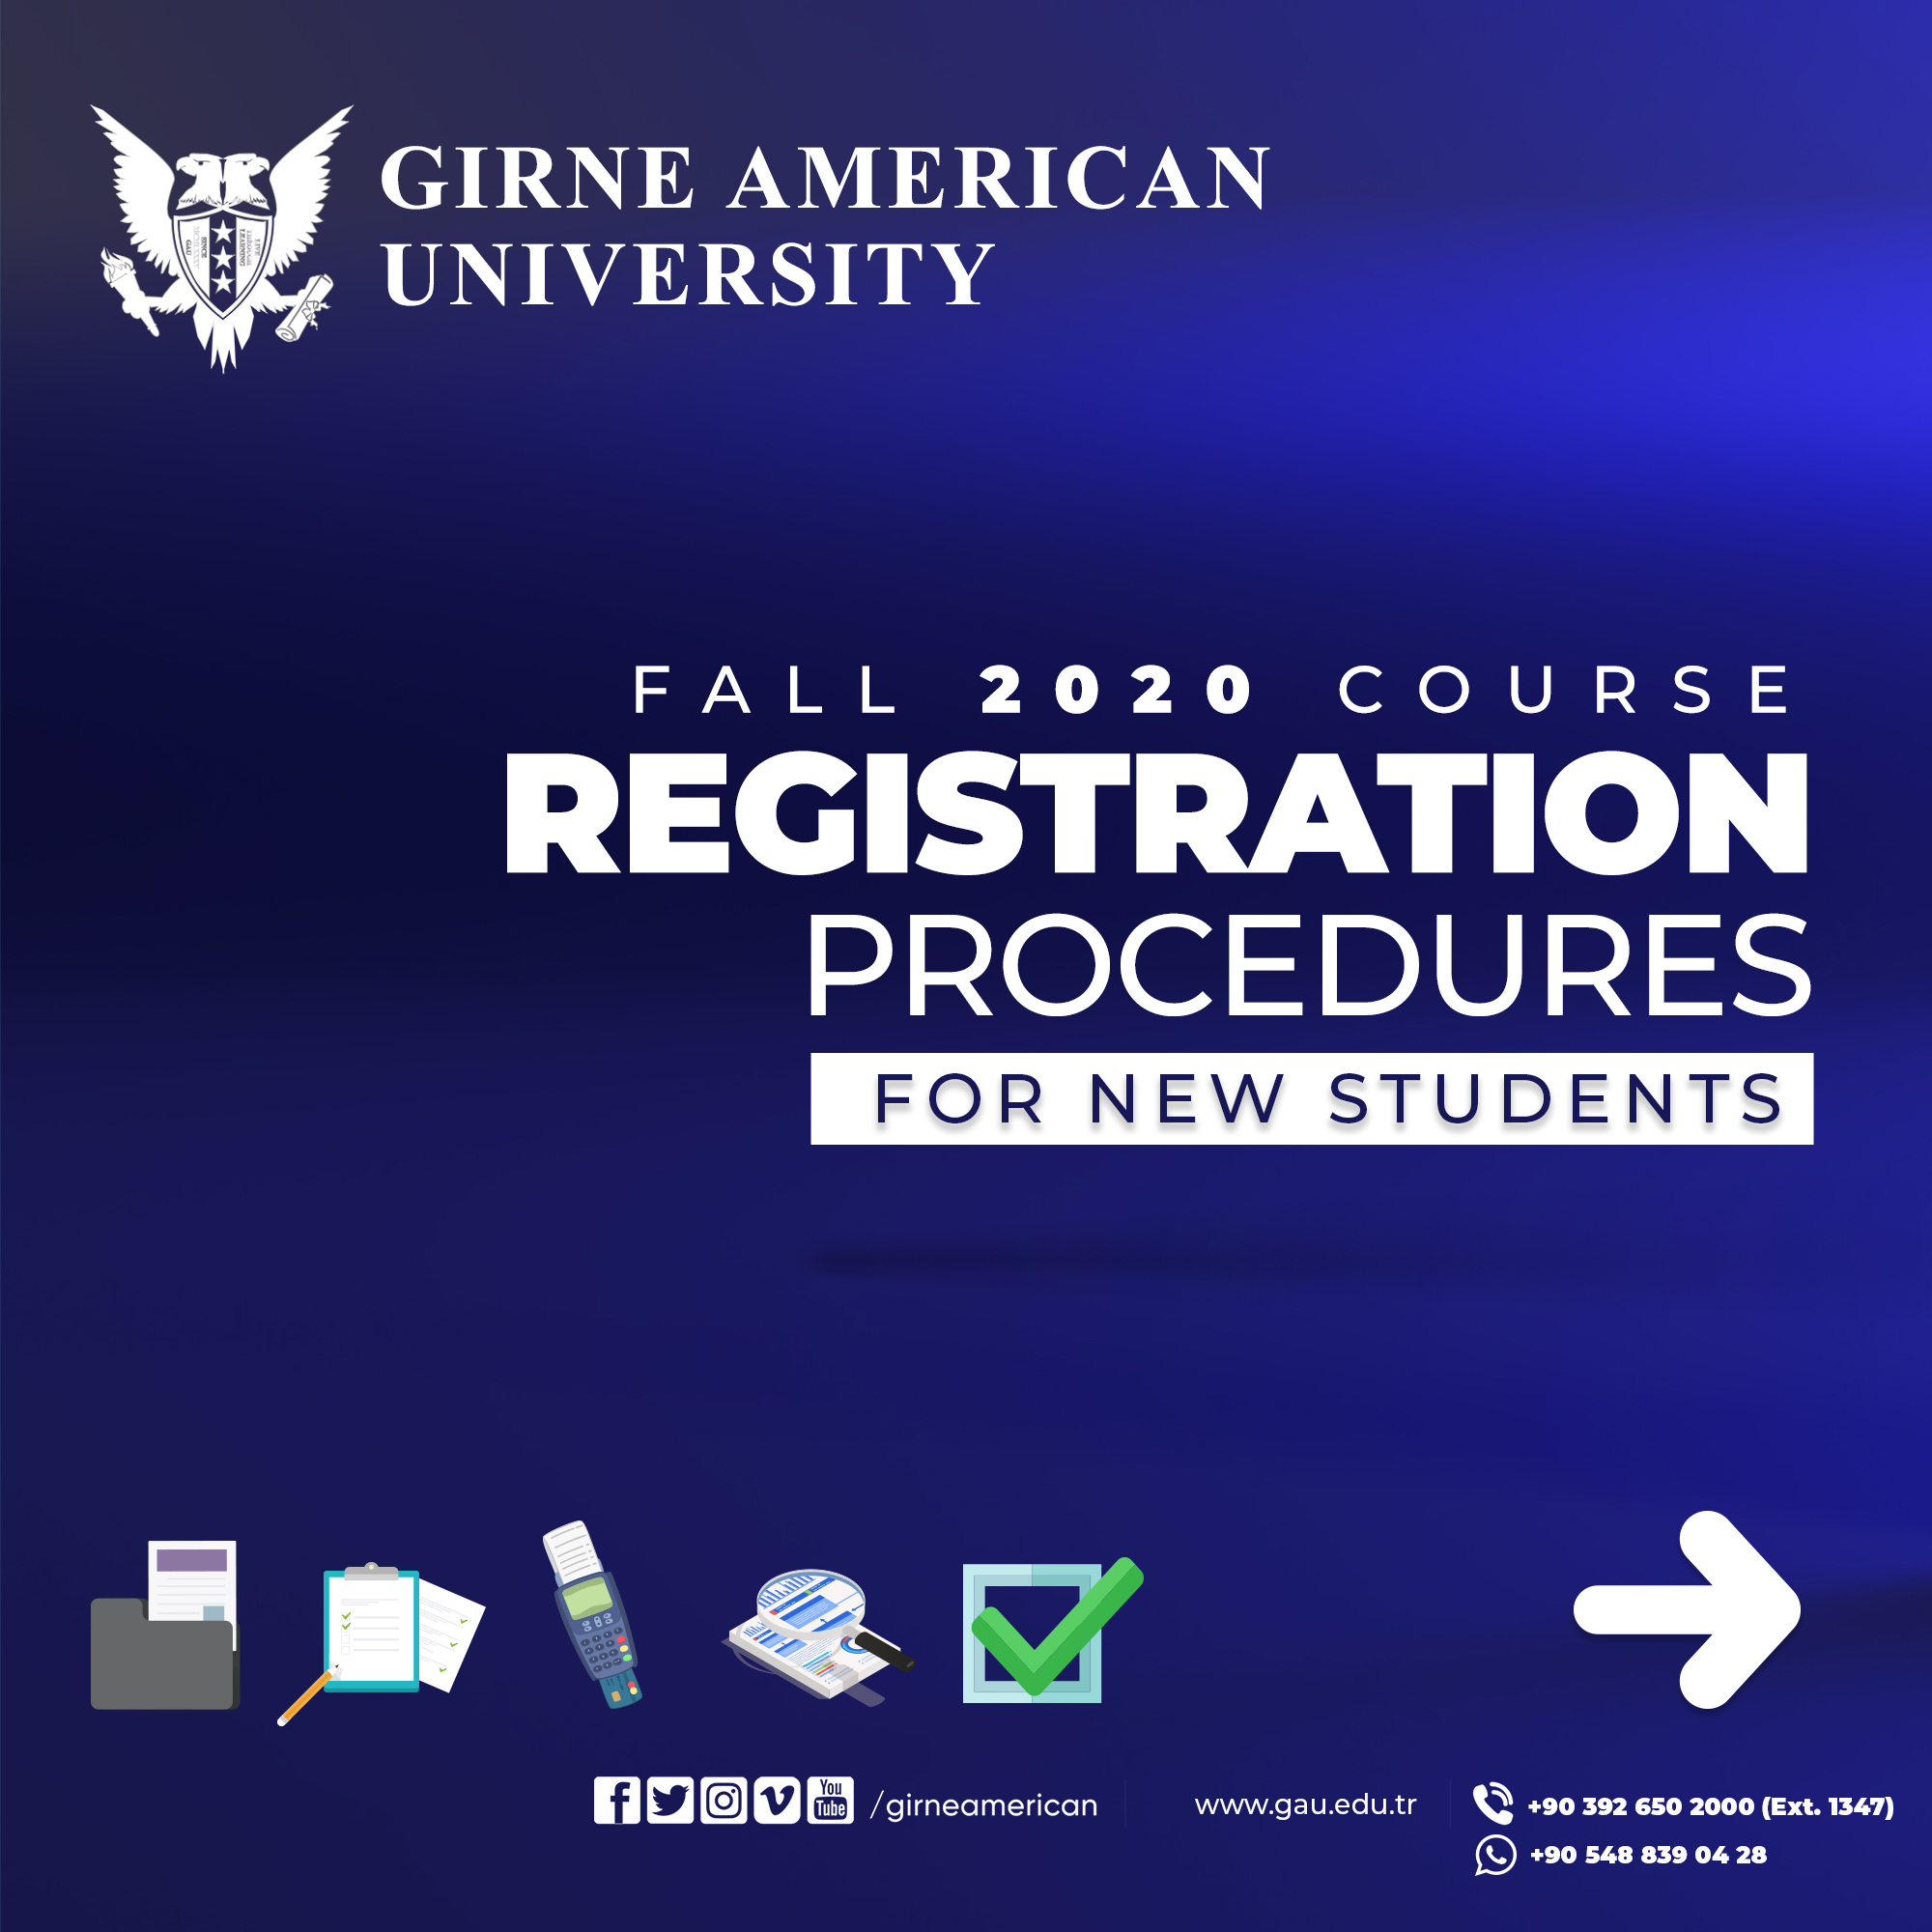 FALL 2020 COURSE REGISTRATION PROCEDURES FOR NEW STUDENTS